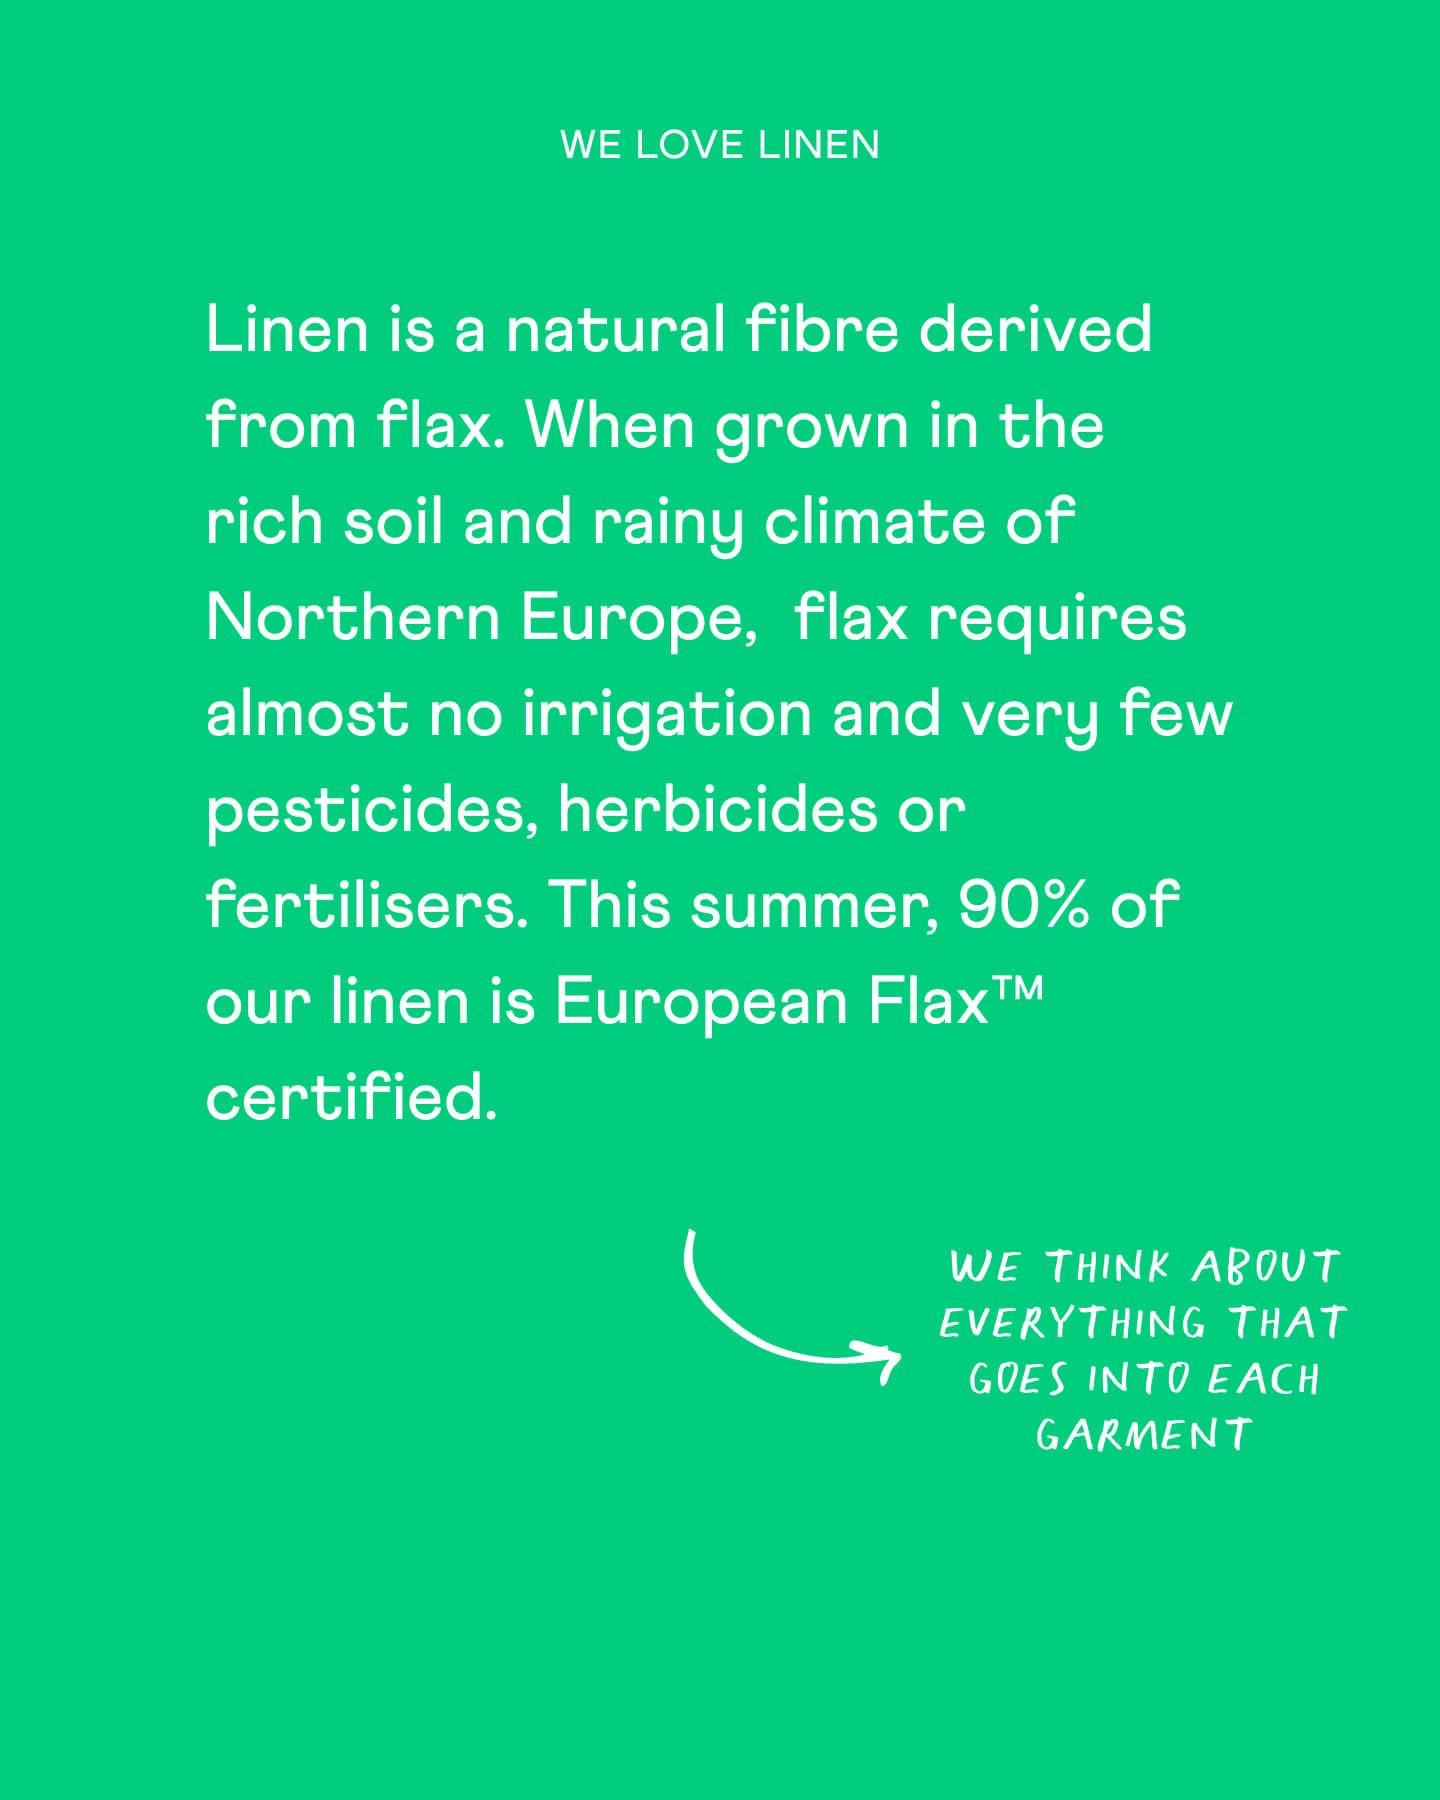 Green background image with text describing what linen is